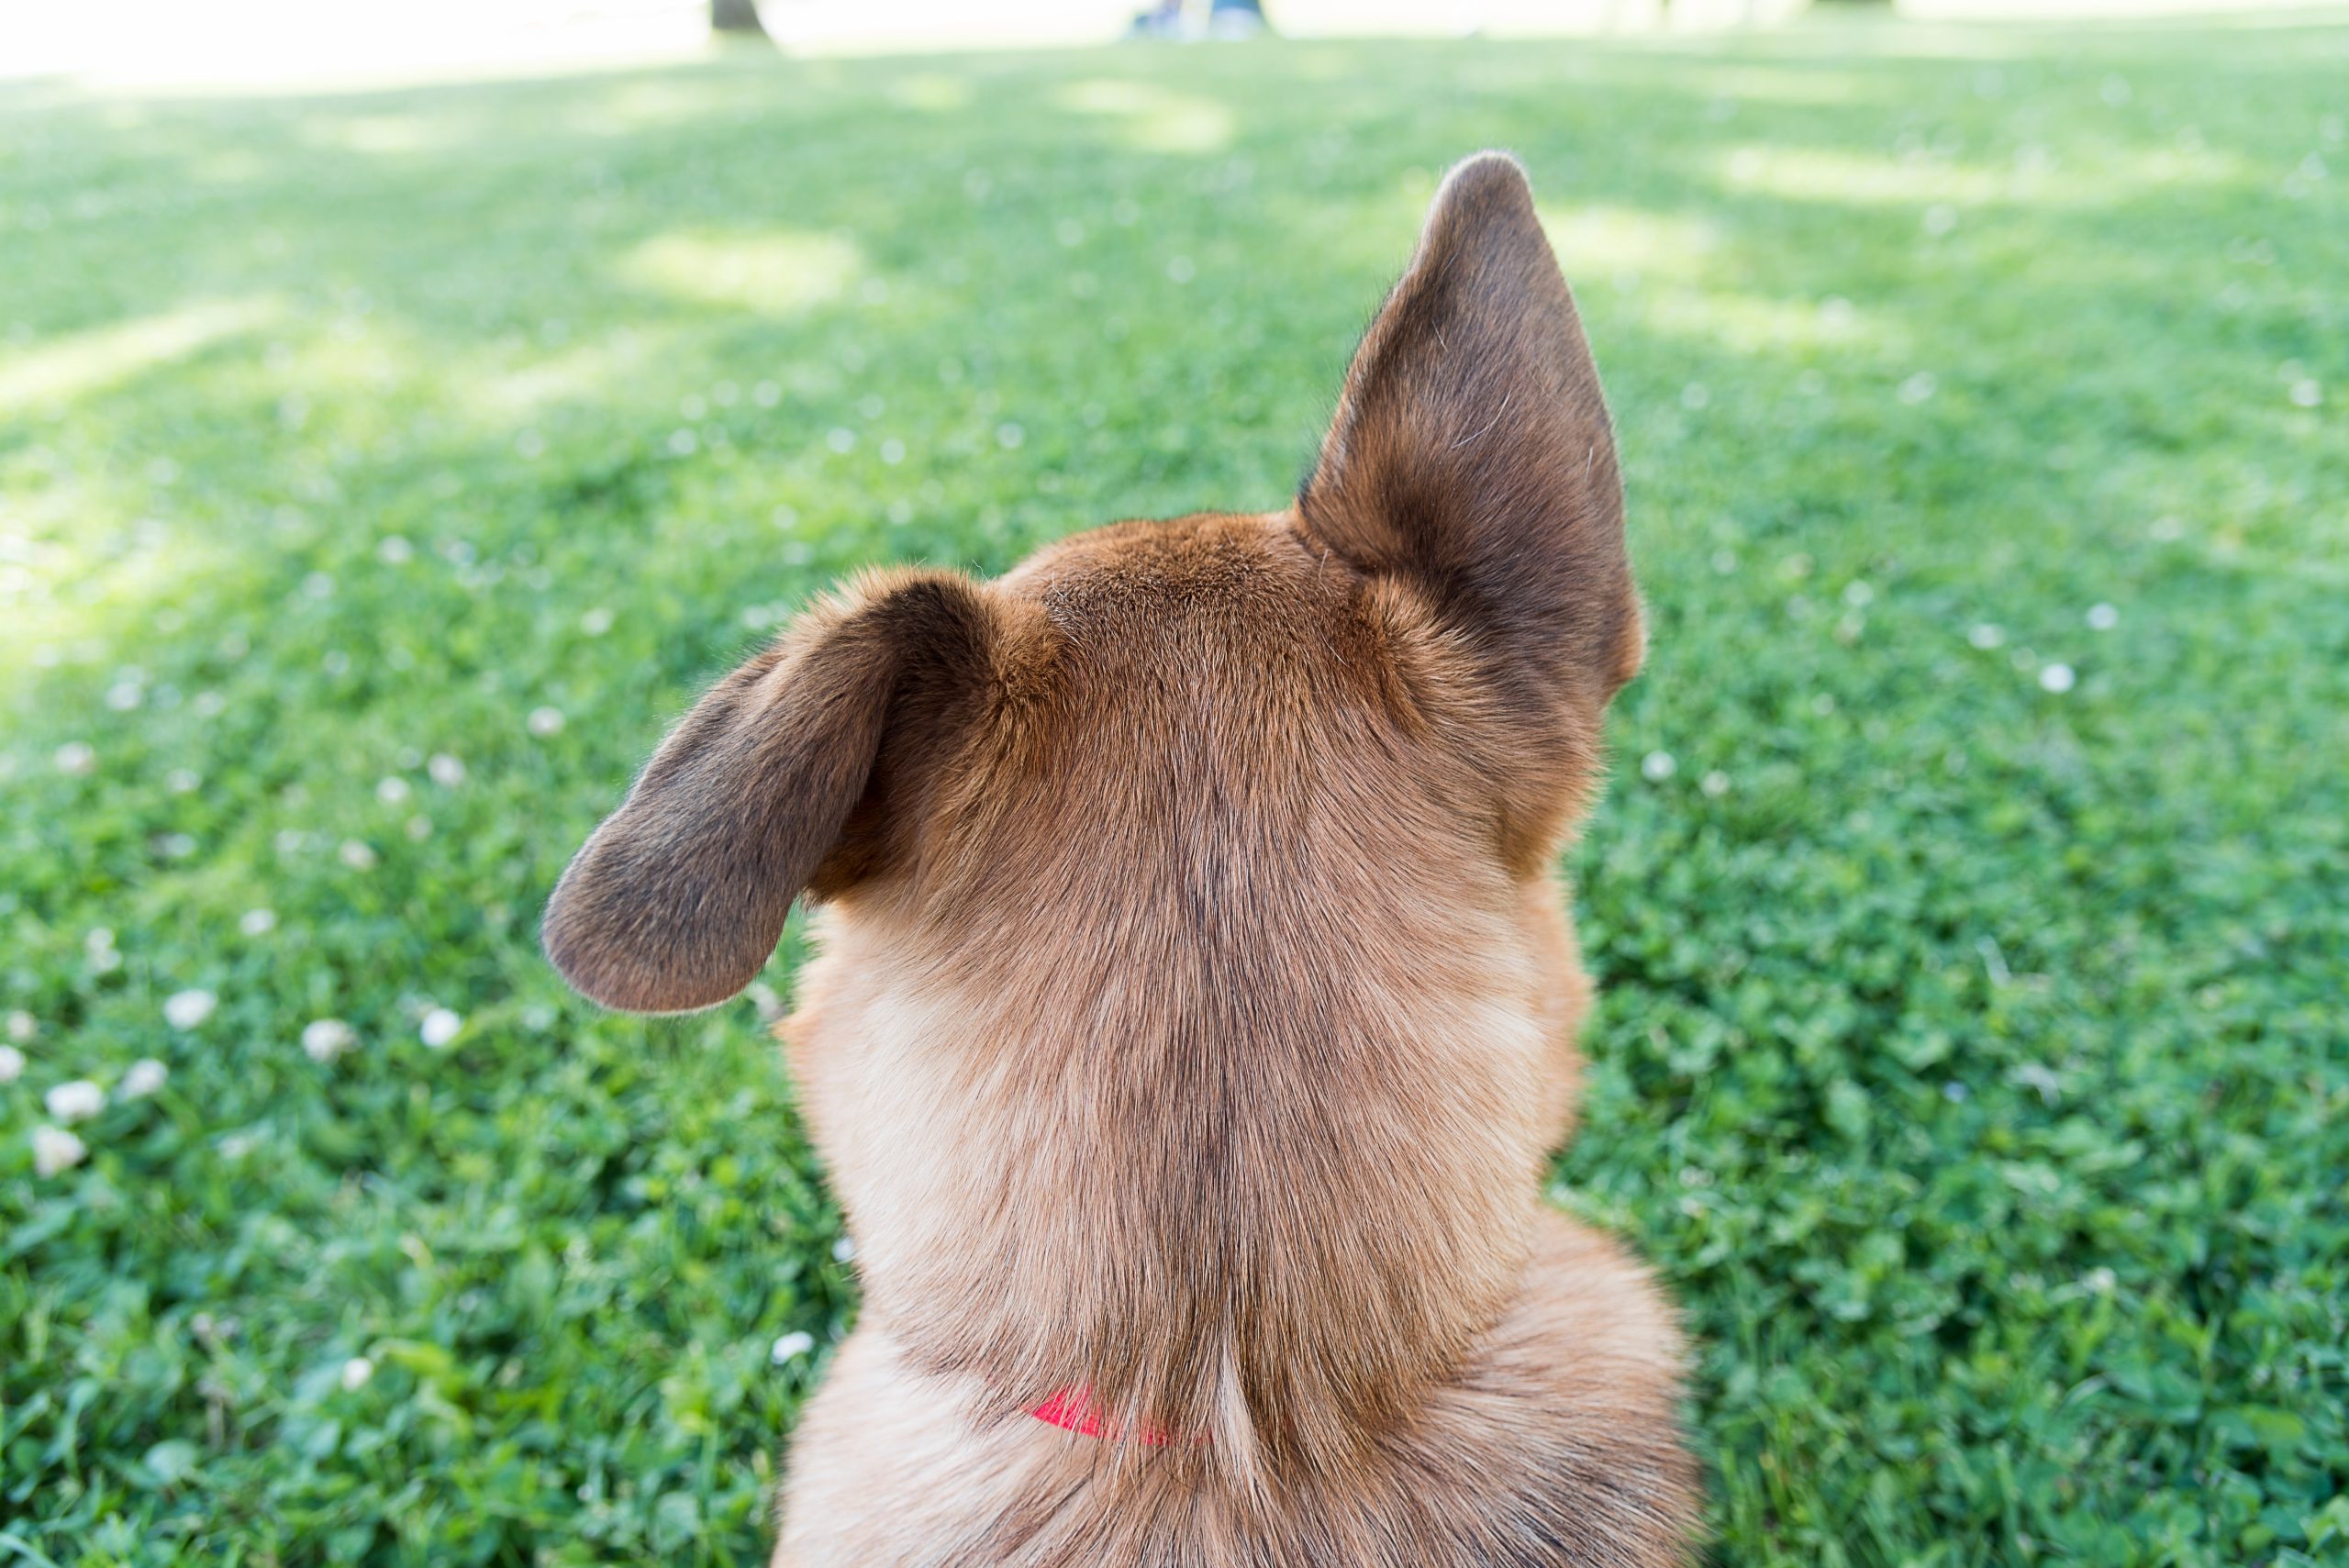 What does it mean when a dog puts his ears back?